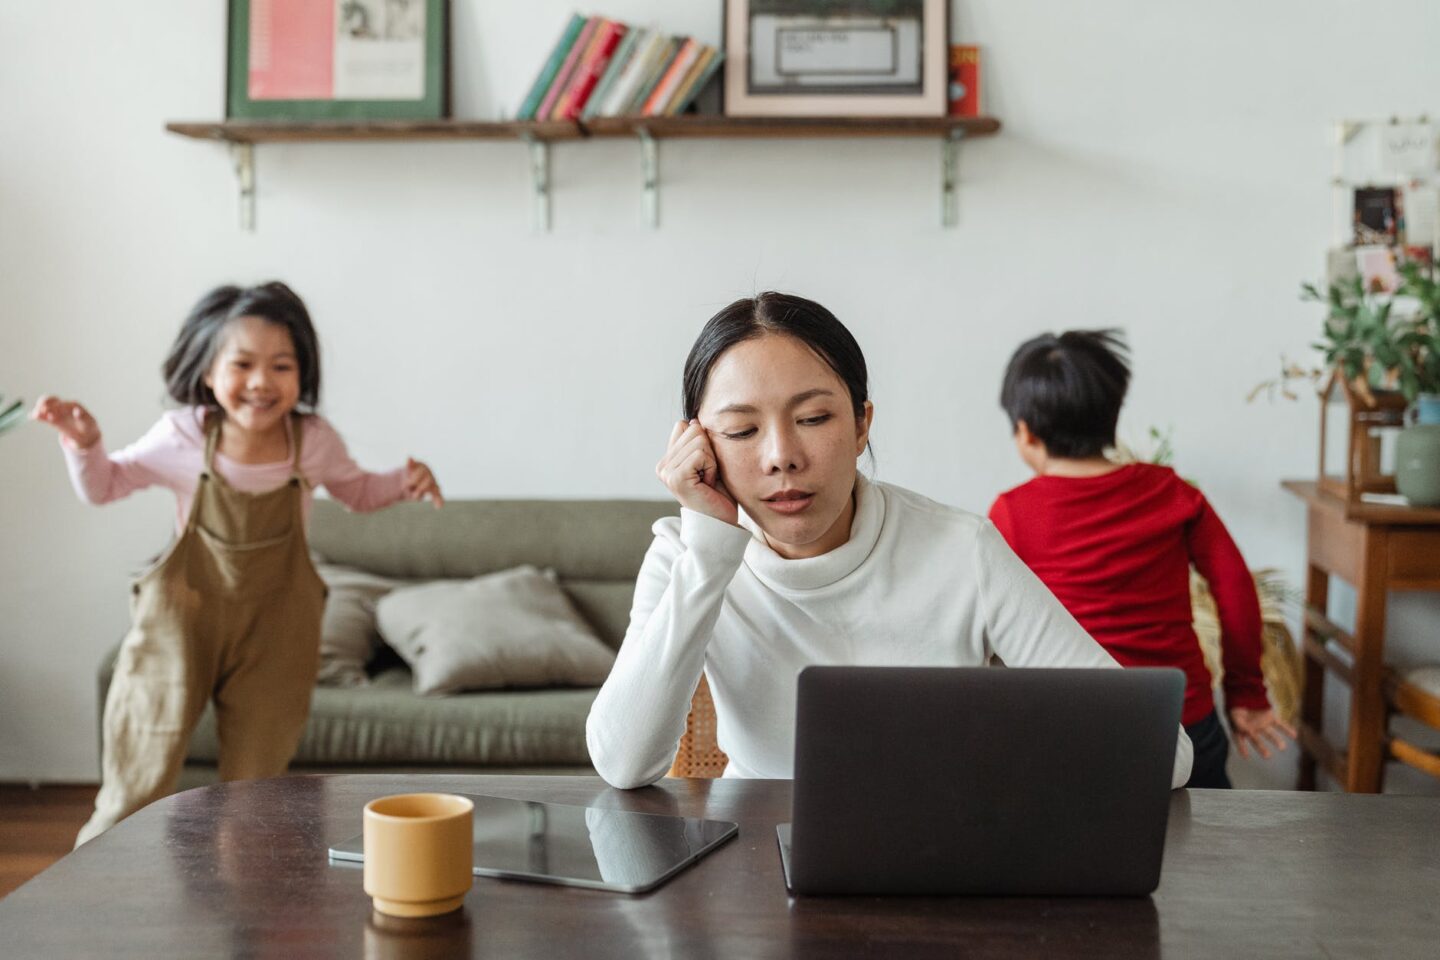 Top tips to help you work from home as a parent